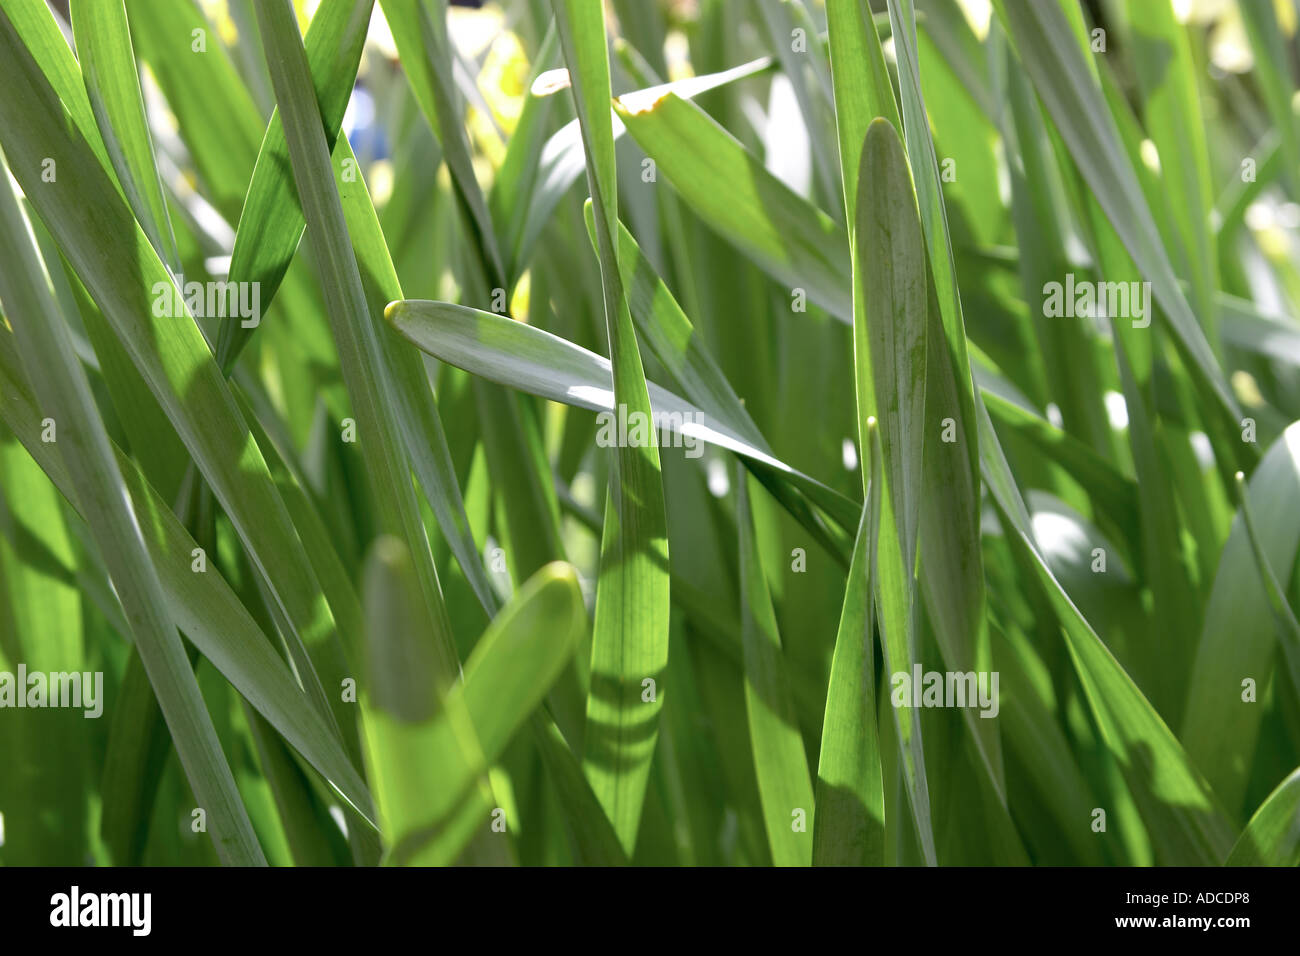 Landscape image of daffodil leaves shot close up with bright spring sunshine Stock Photo